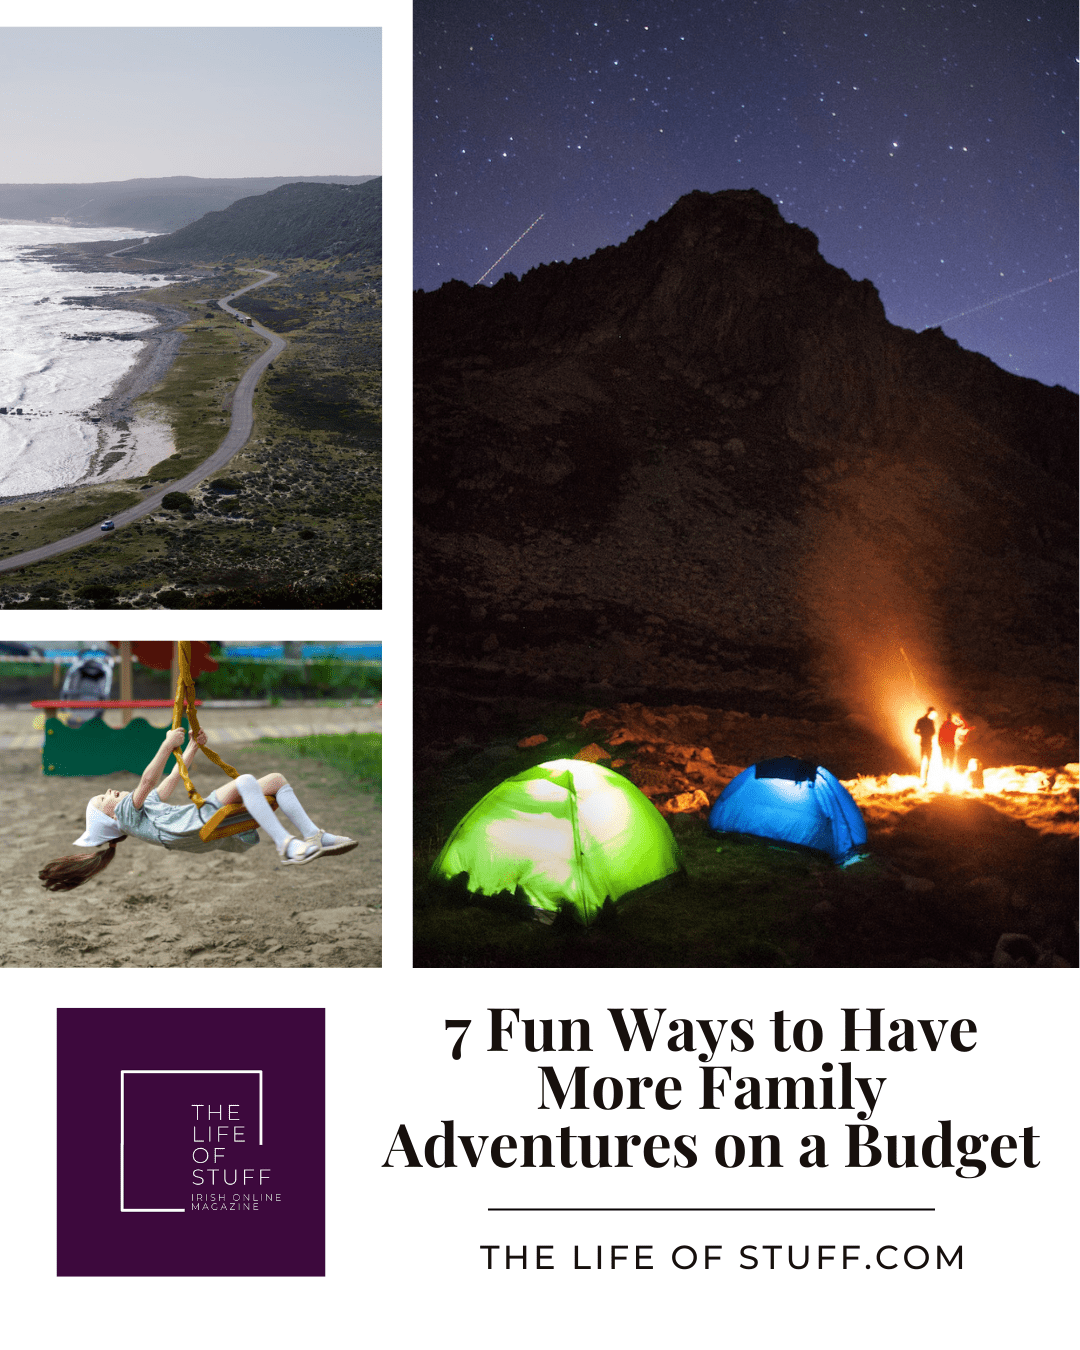 7 Fun Ways to Have More Family Adventures on a Budget - The Life of Stuff